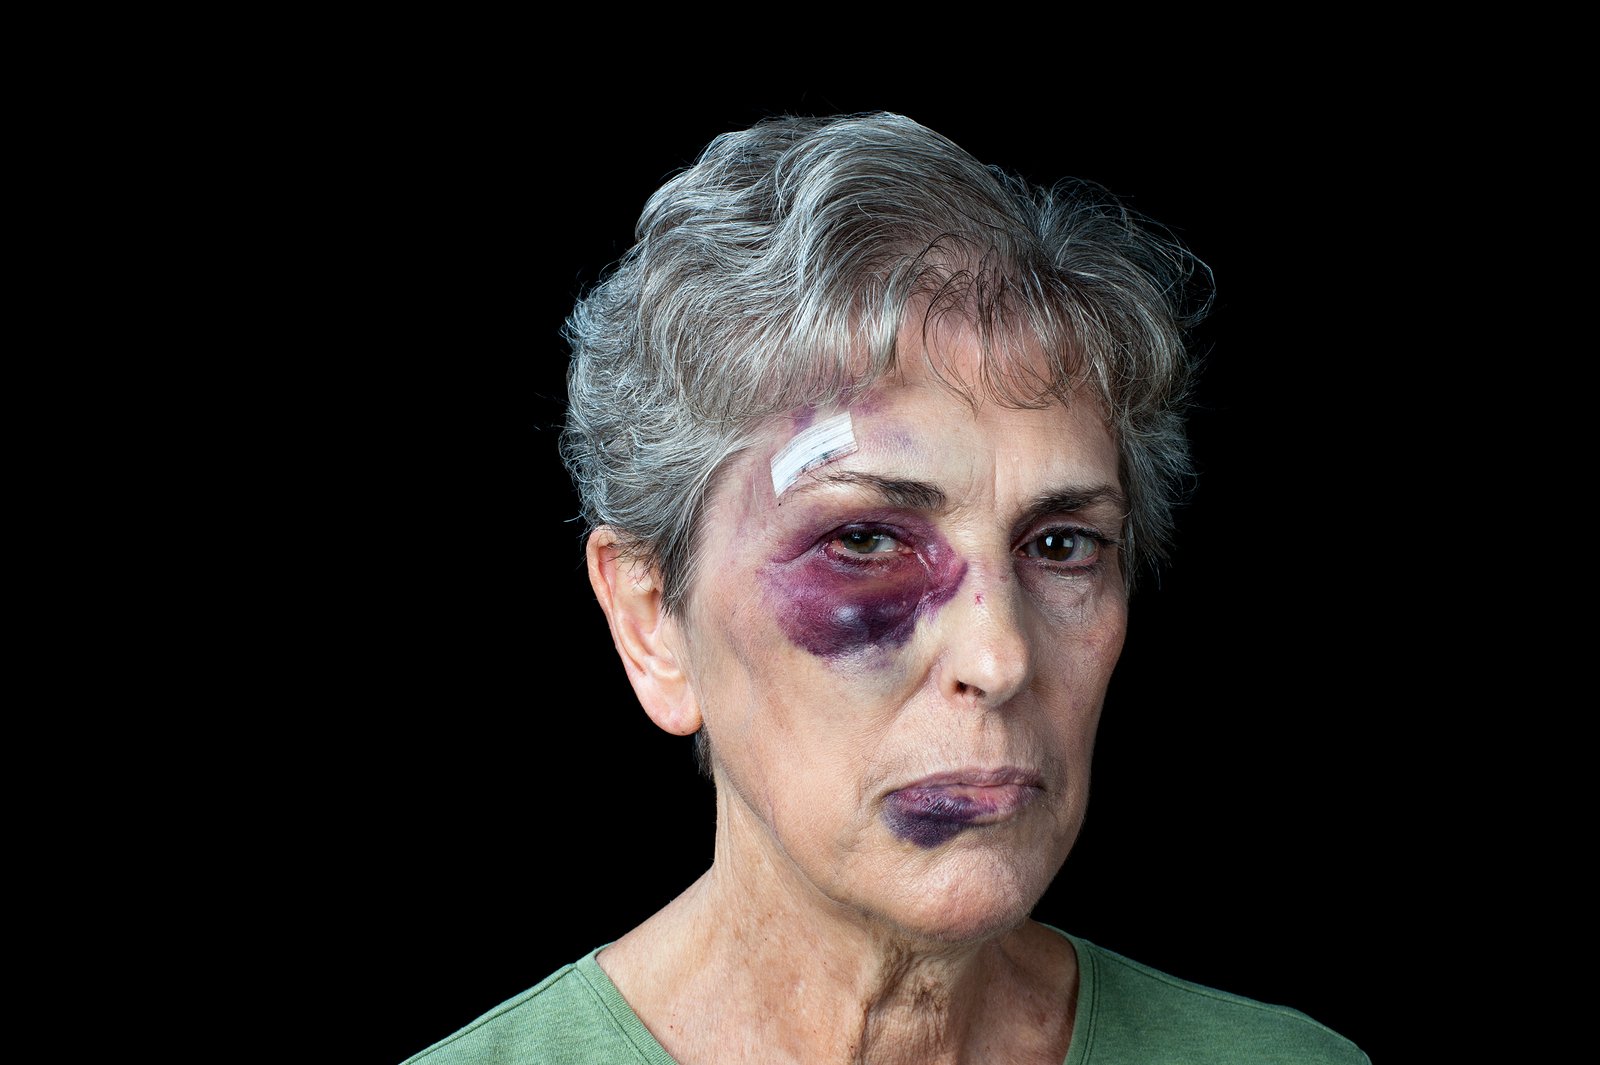 An elderly grandmother badly beaten with stitches, a black eye and a fat lip.